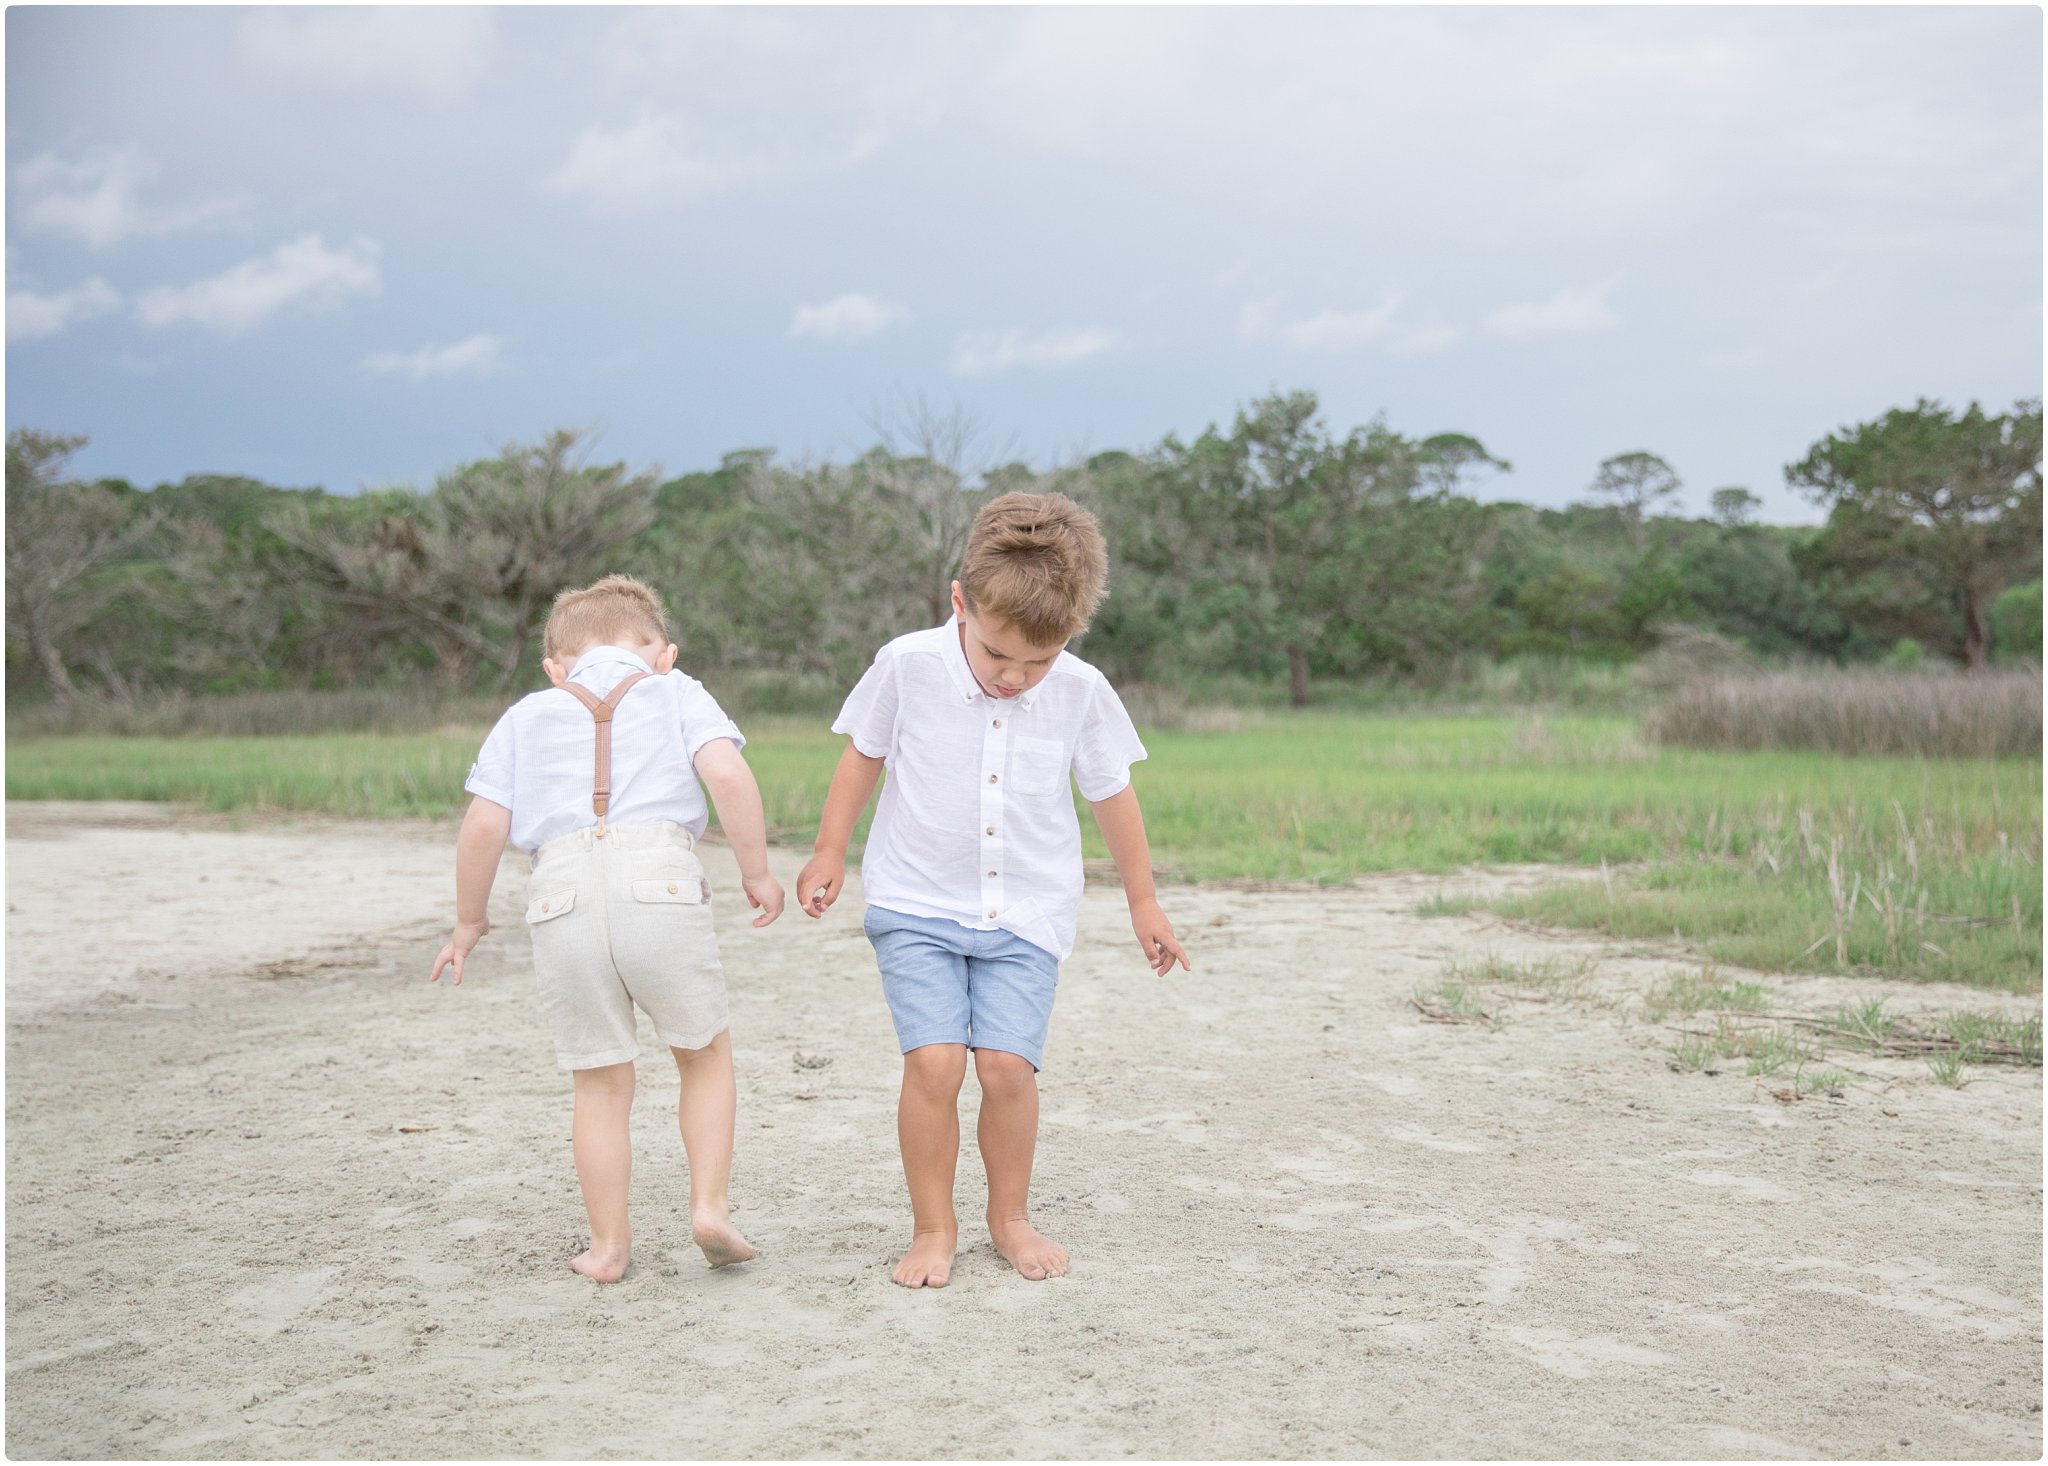 Candace hires photography | www.candacehiresphotography.com | family portraits jekyll island